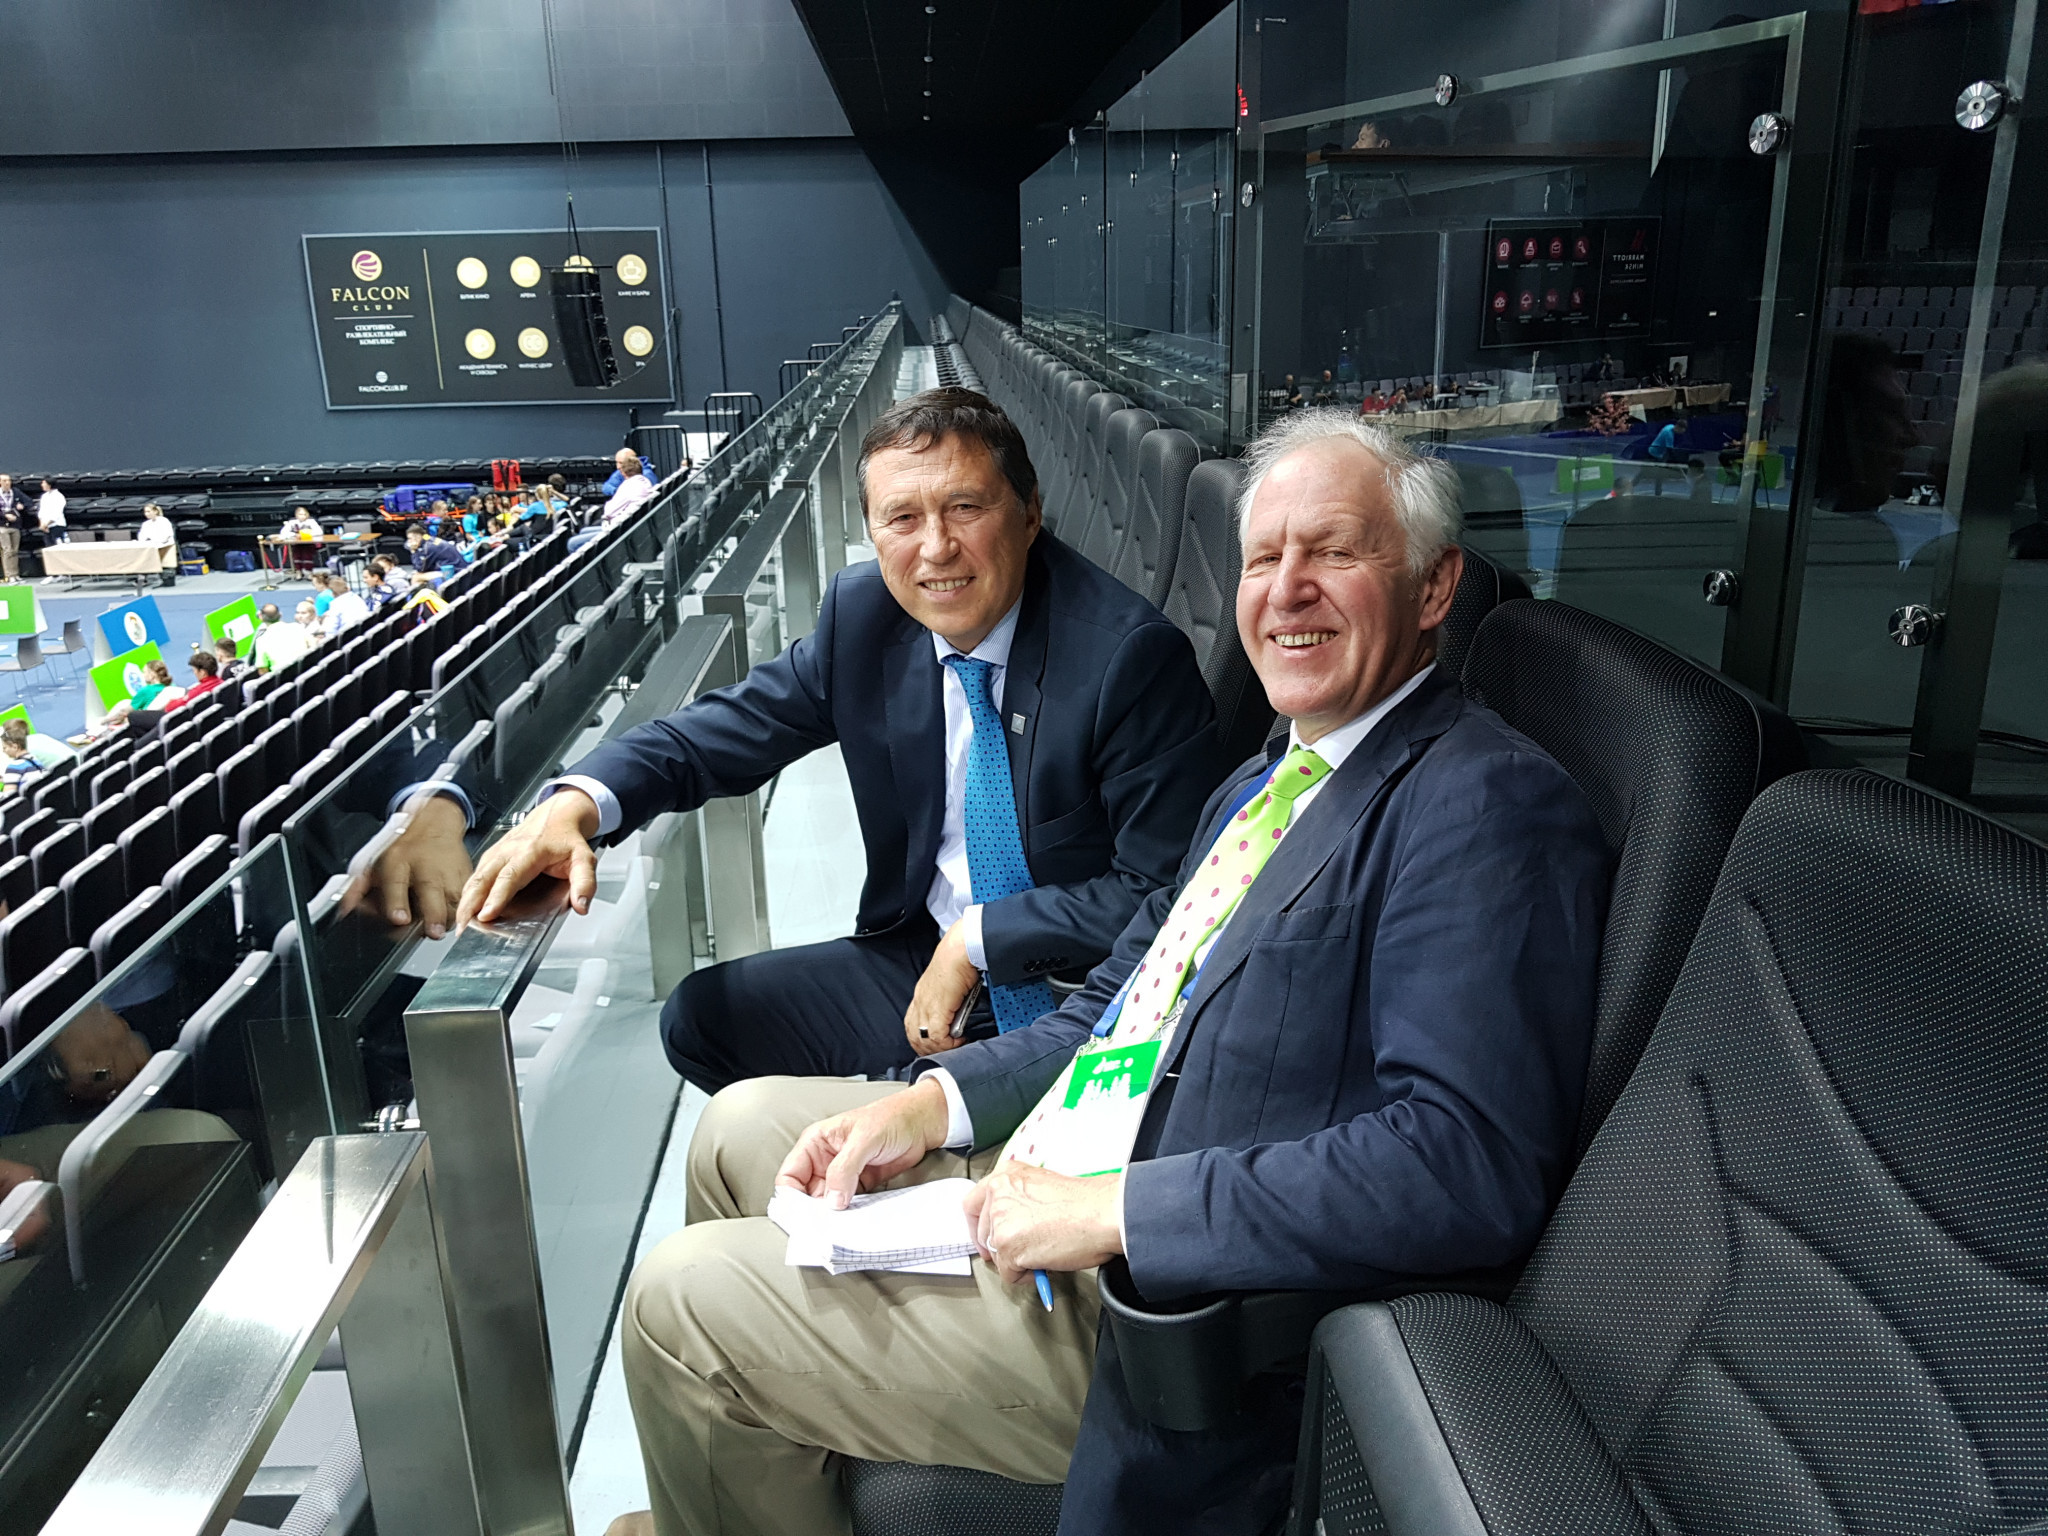 David Owen of insidethegames with Minsk 2019 Organising Committee chief executive George Katulin ©ITG